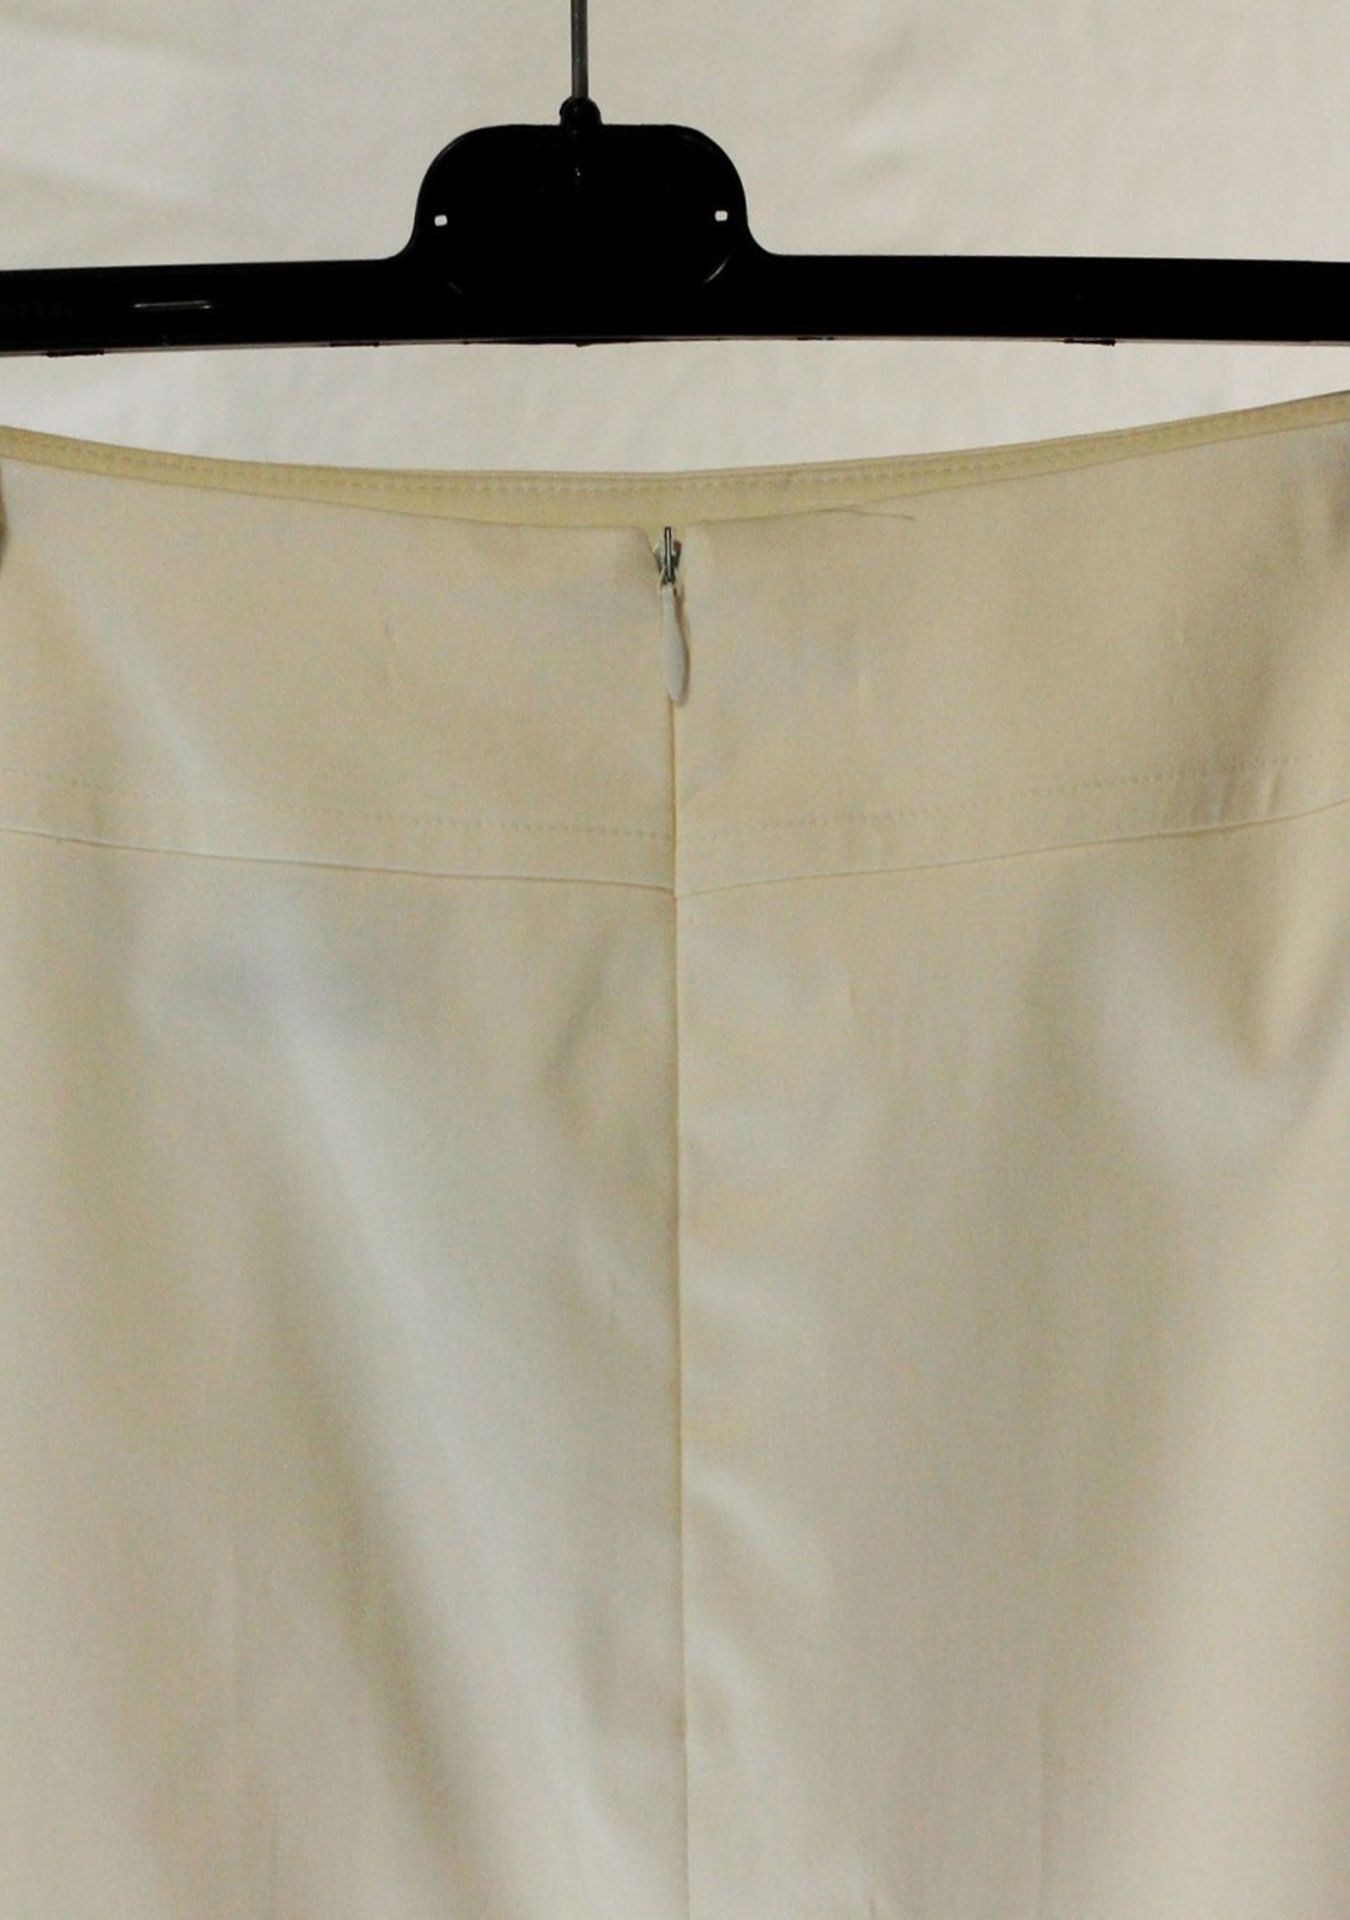 1 x Anne Belin White Skirt - Size: 14 - Material: 100% Cotton - From a High End Clothing Boutique In - Image 4 of 9